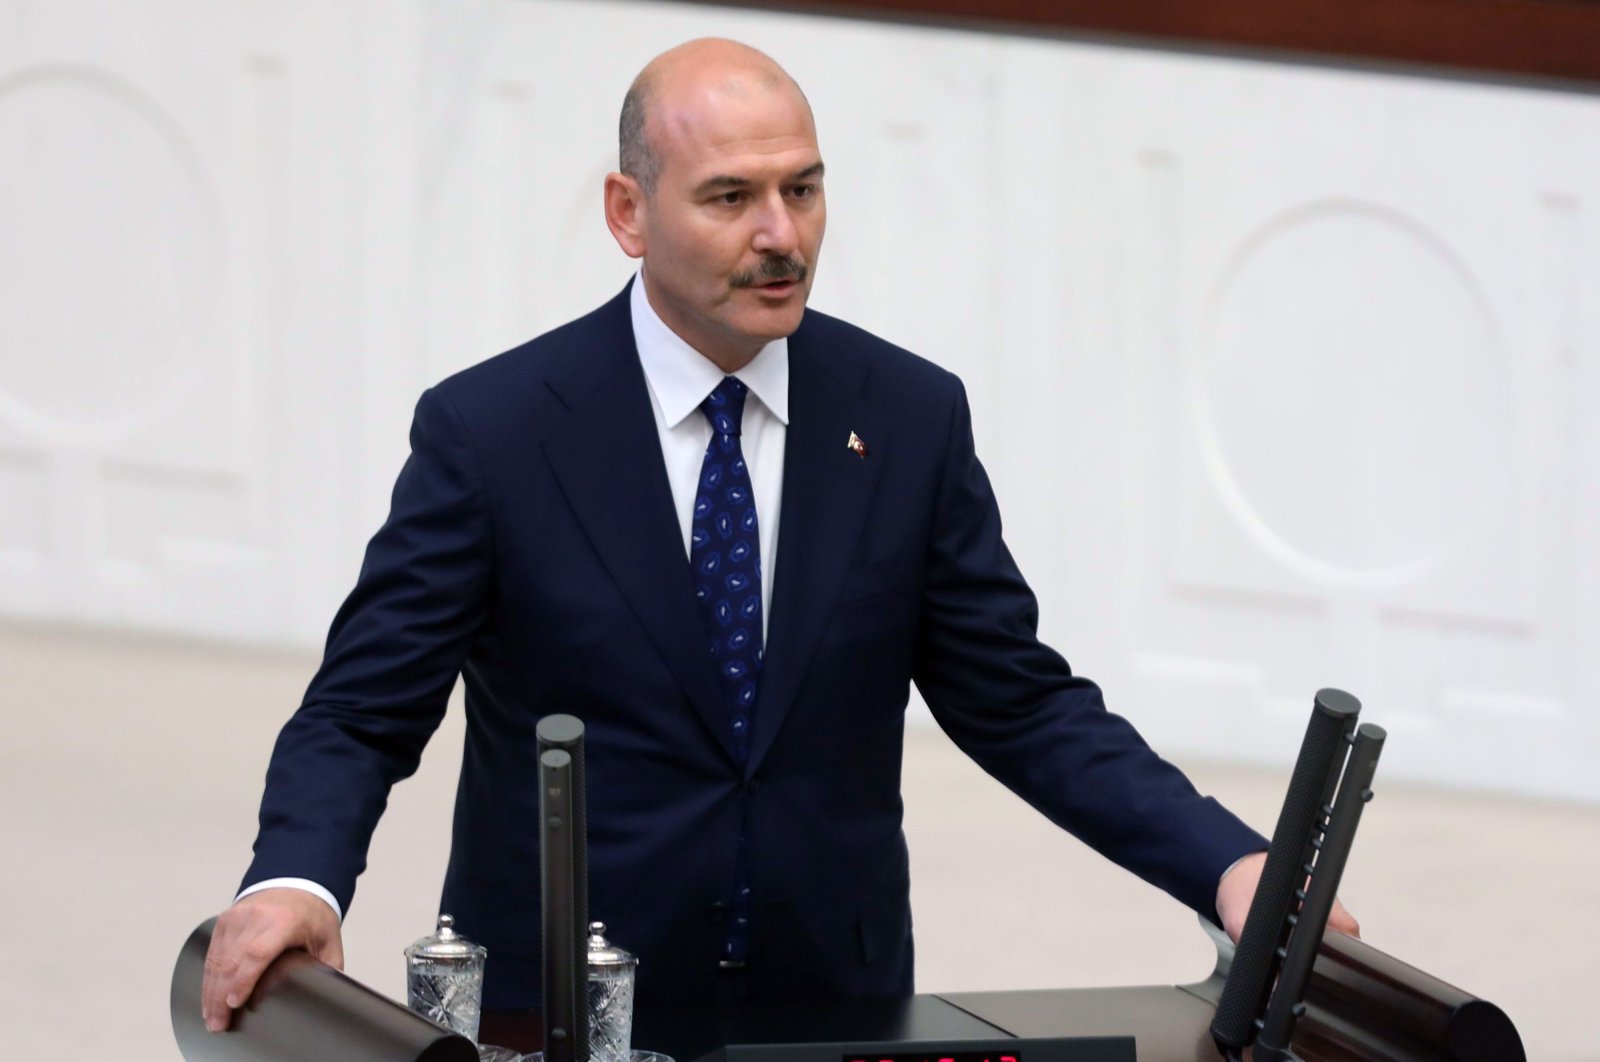 Interior Minister Suleyman Soylu is sworn in at the Grand National Assembly of Turkey (TBMM) in Ankara, Turkey, July 10, 2018. (AFP Photo)